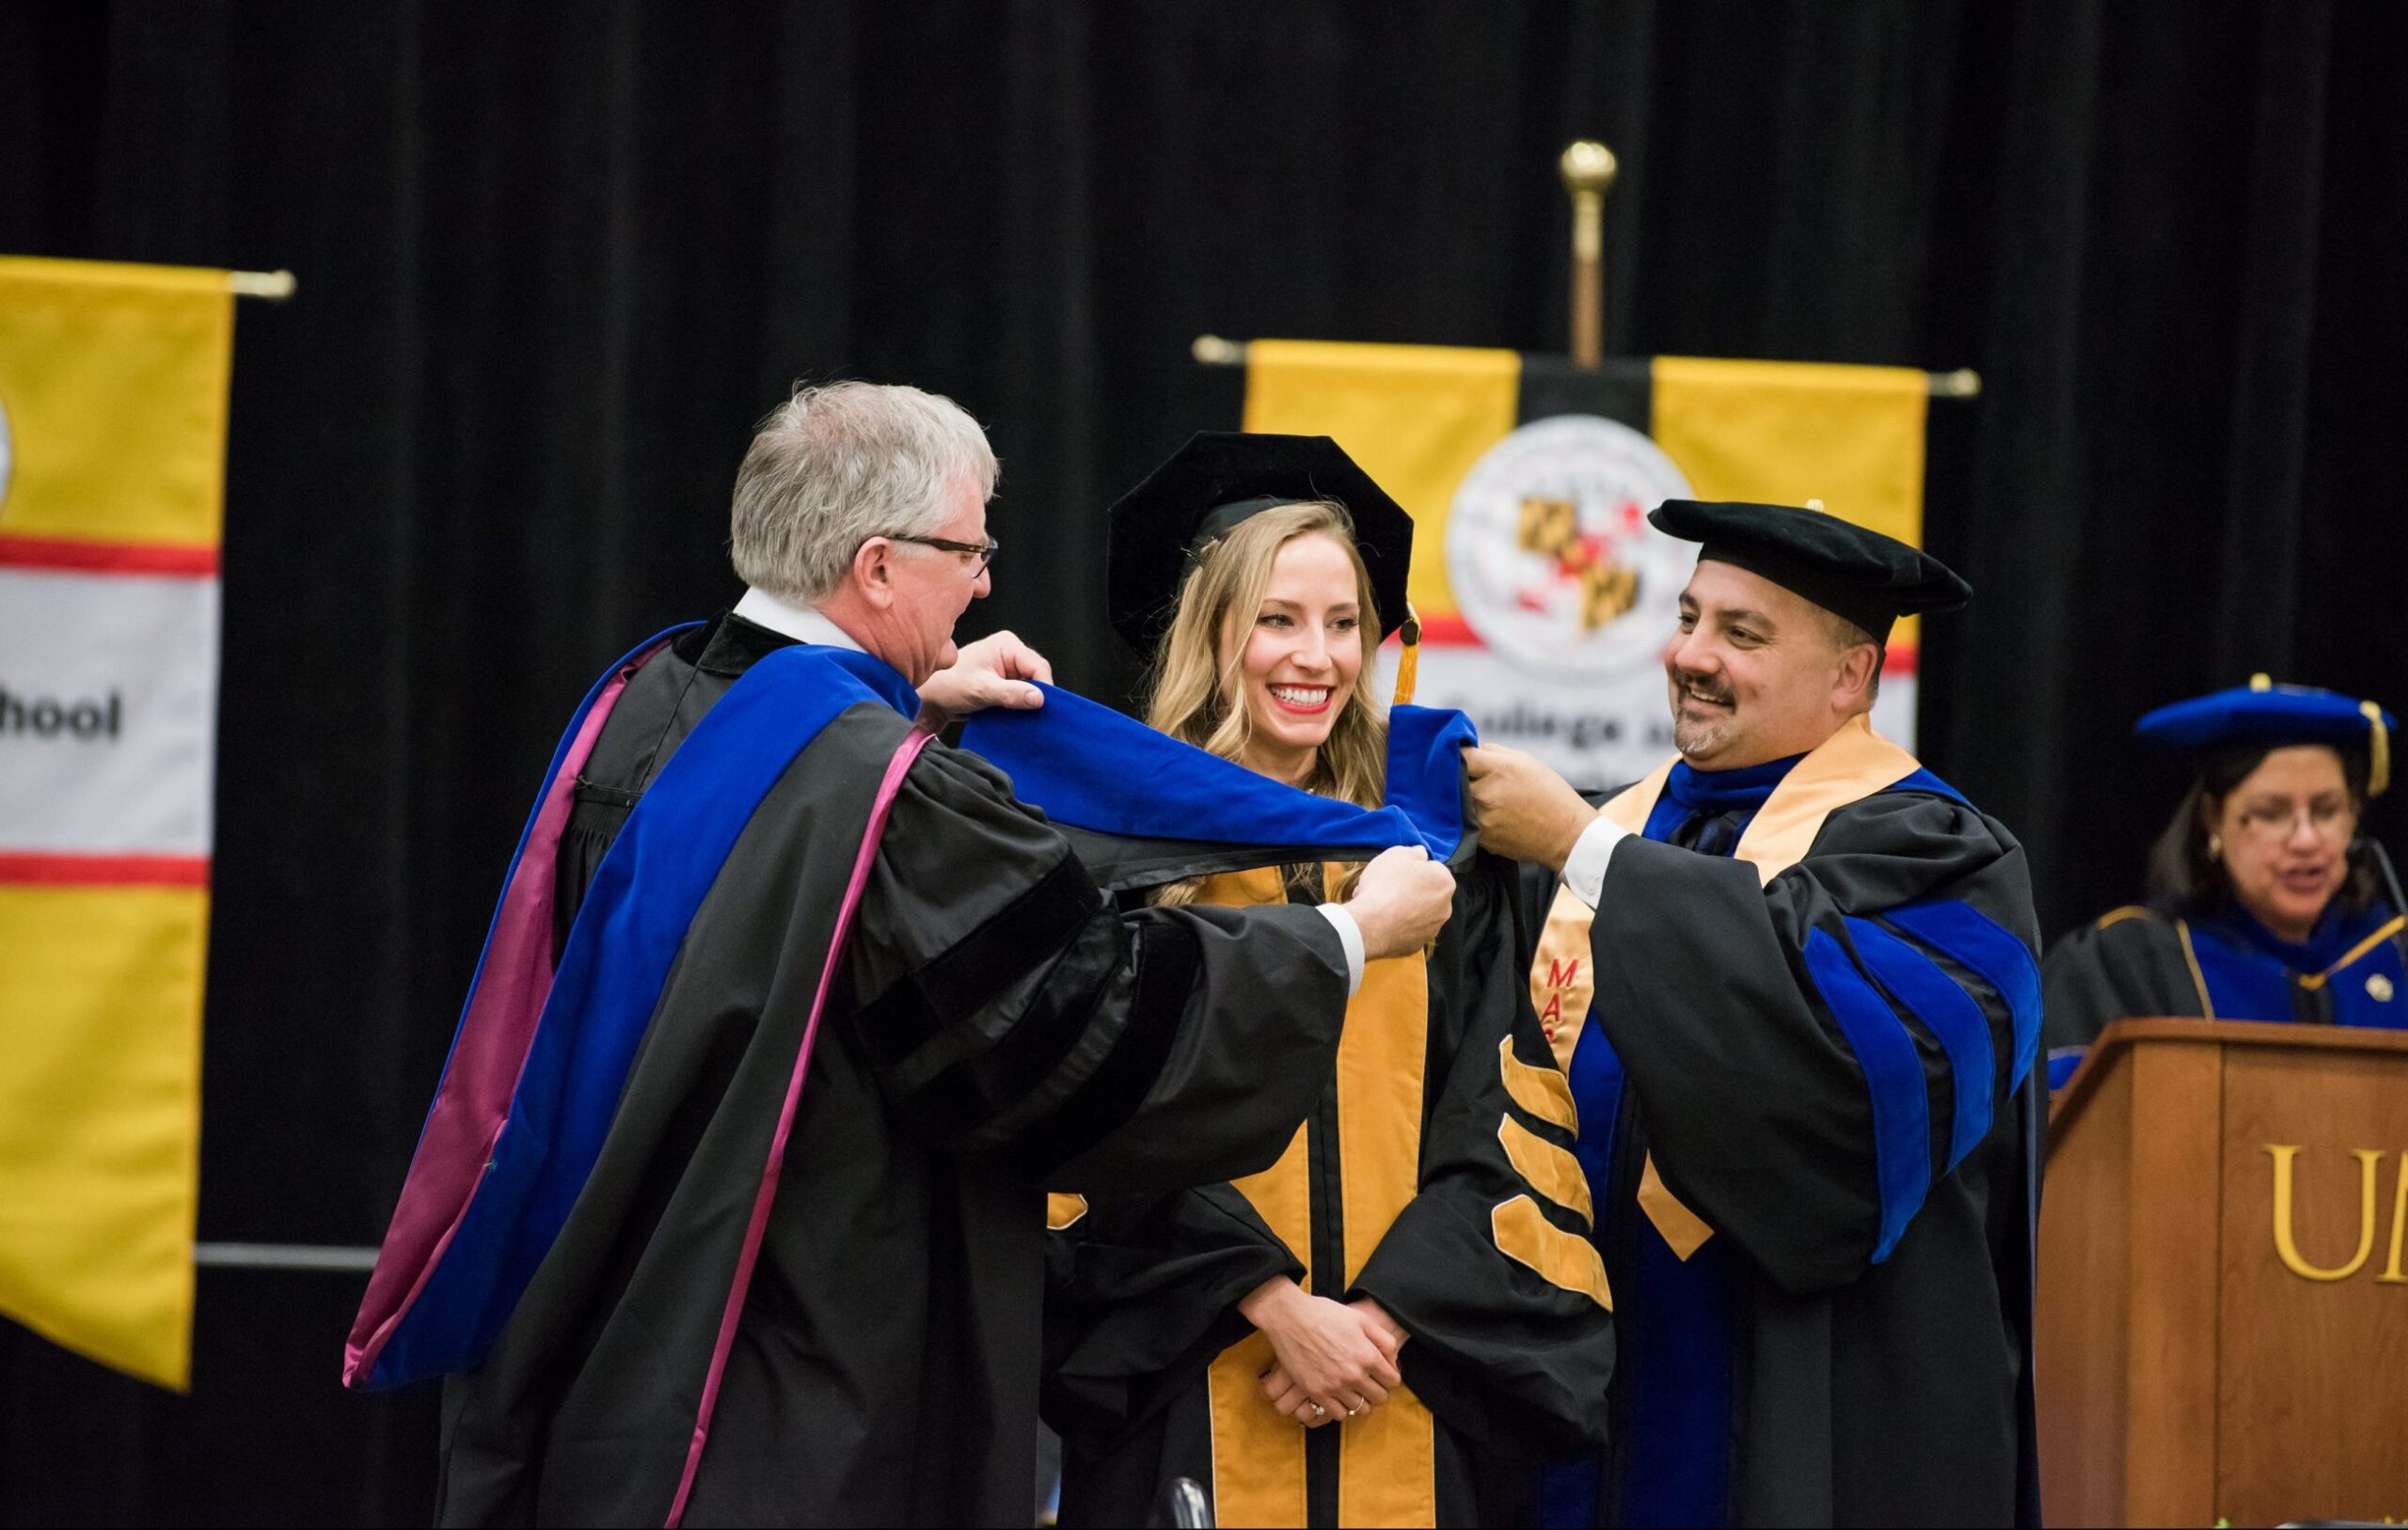 Student receives her PhD in hooding ceremony with faculty member and provost